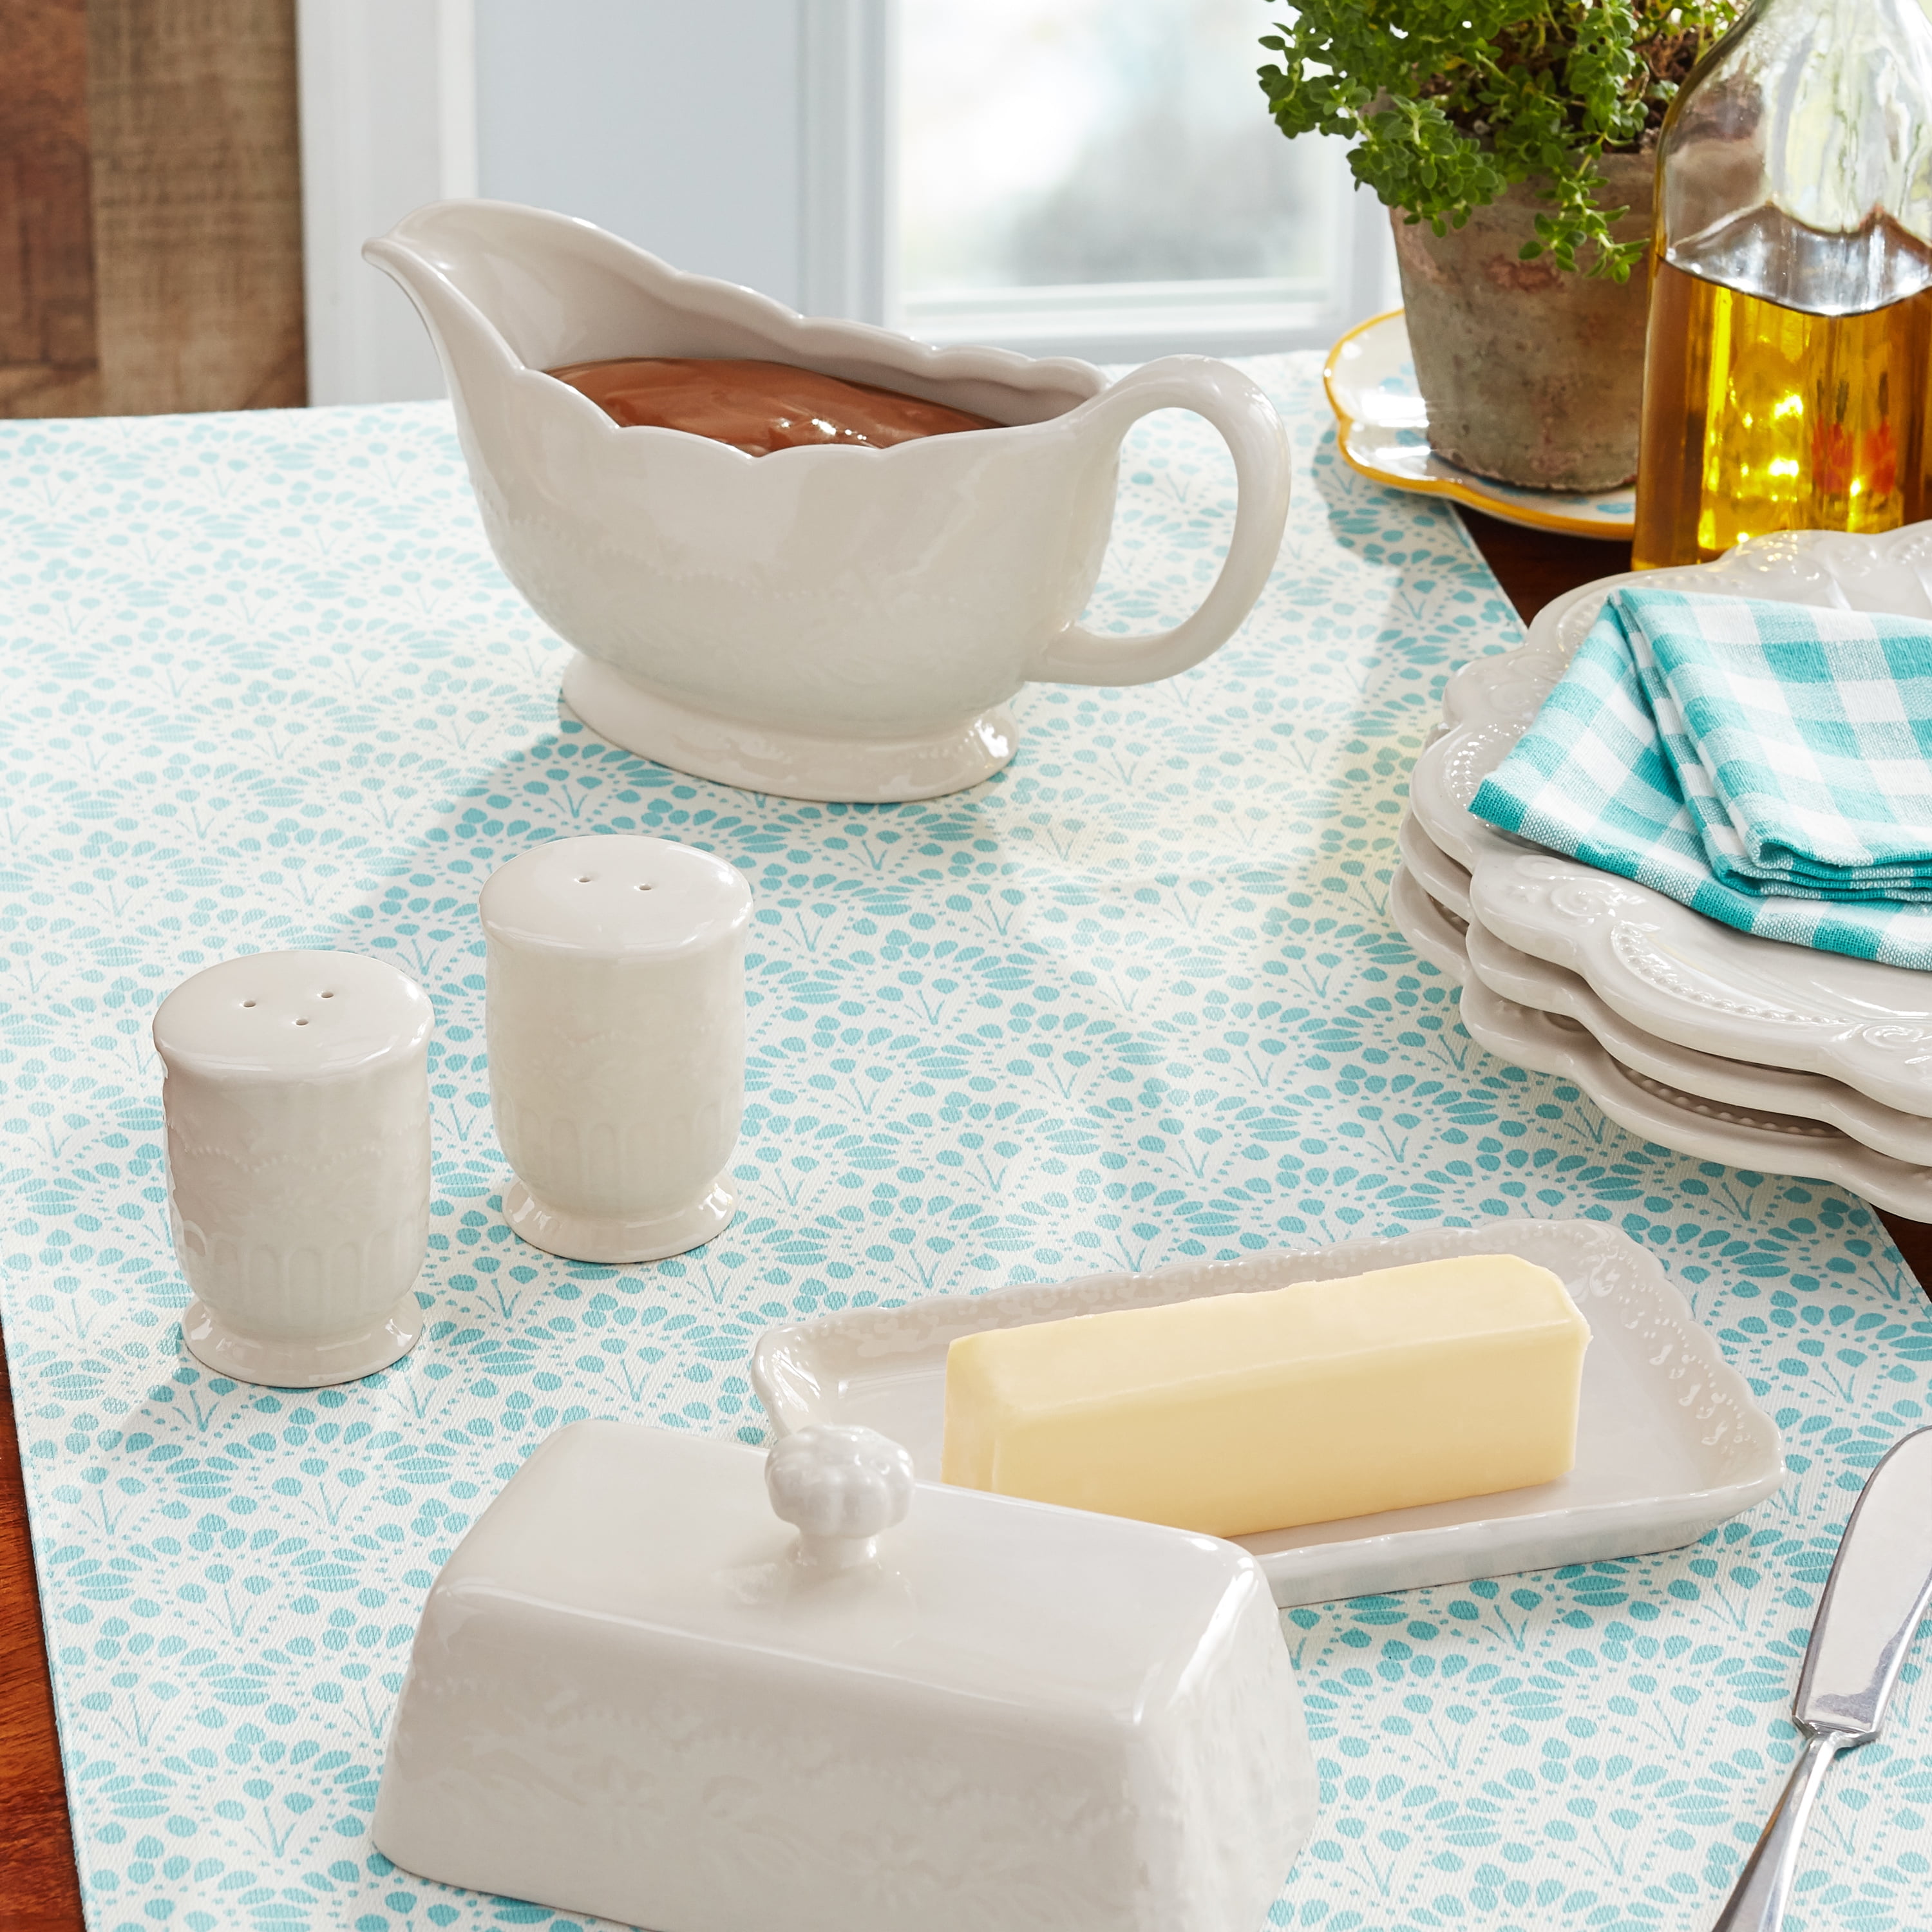 The Pioneer Woman Toni 5-Piece Stoneware Butter Dish, Gravy Boat, and Salt & Pepper Serve Set, Teal